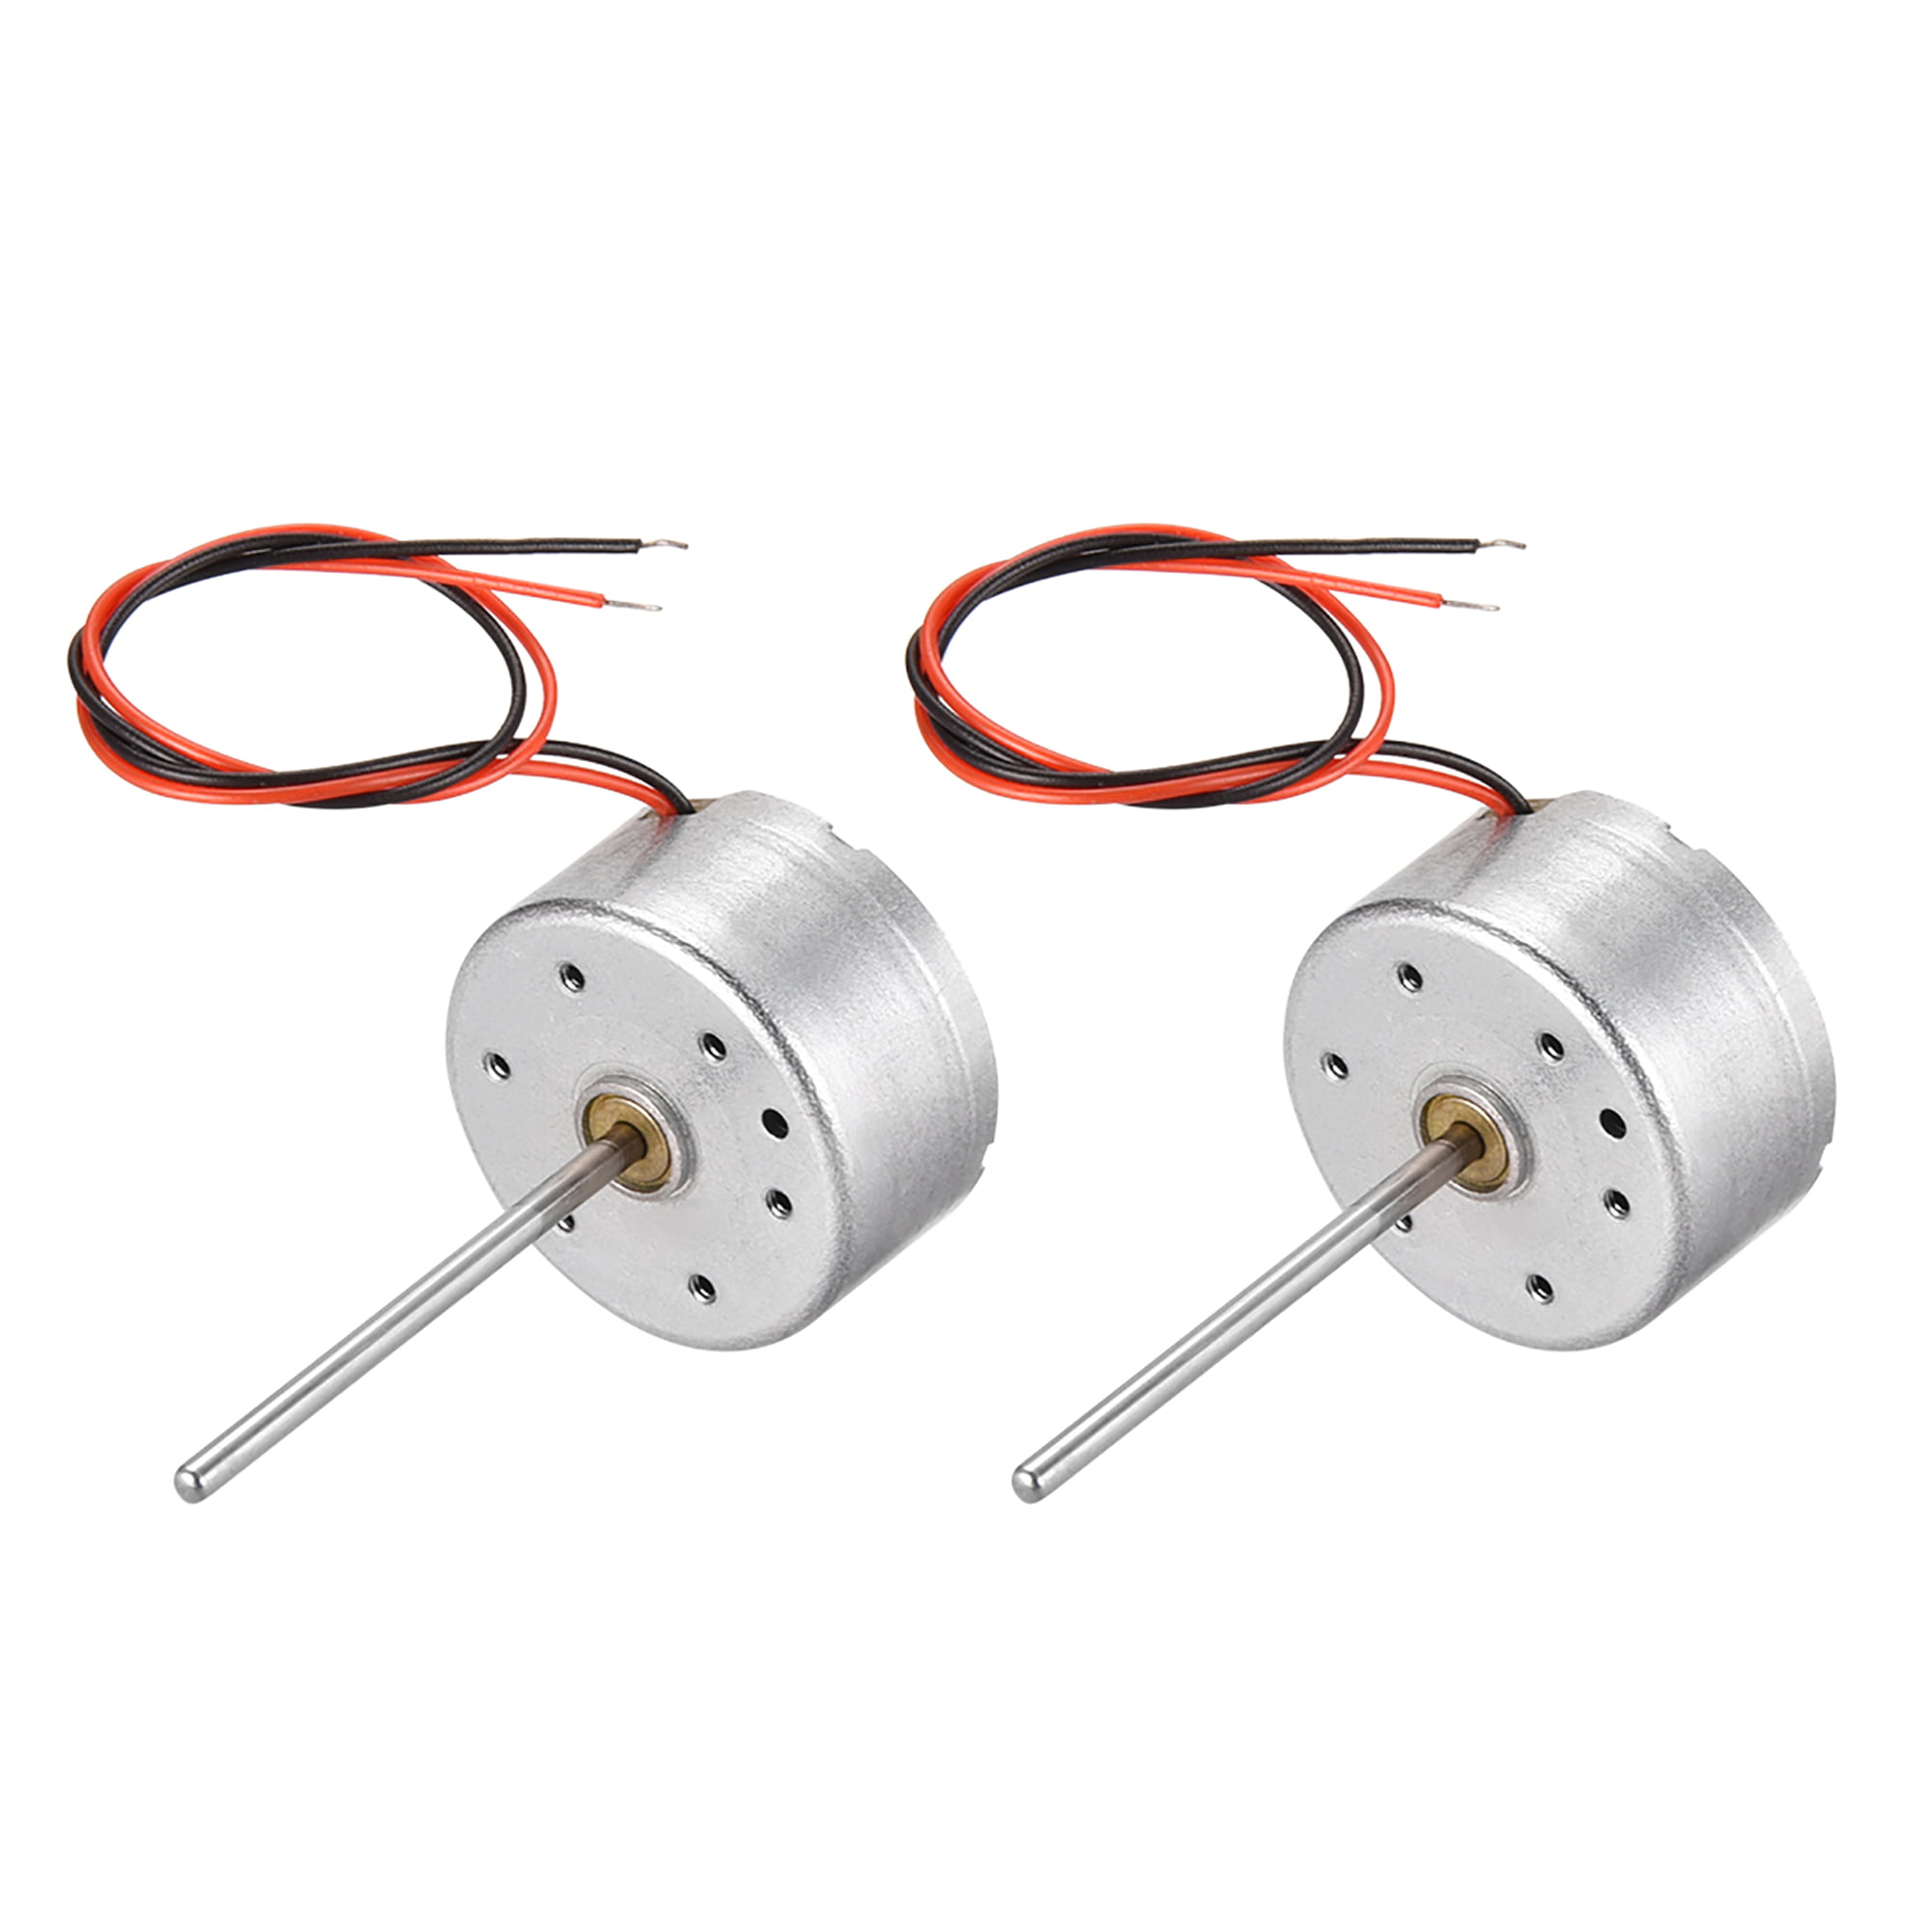 DC Motor 4.5V 2000RPM 0.02A 2 Wires Electric Motor Round Shaft for RC Boat Toys 